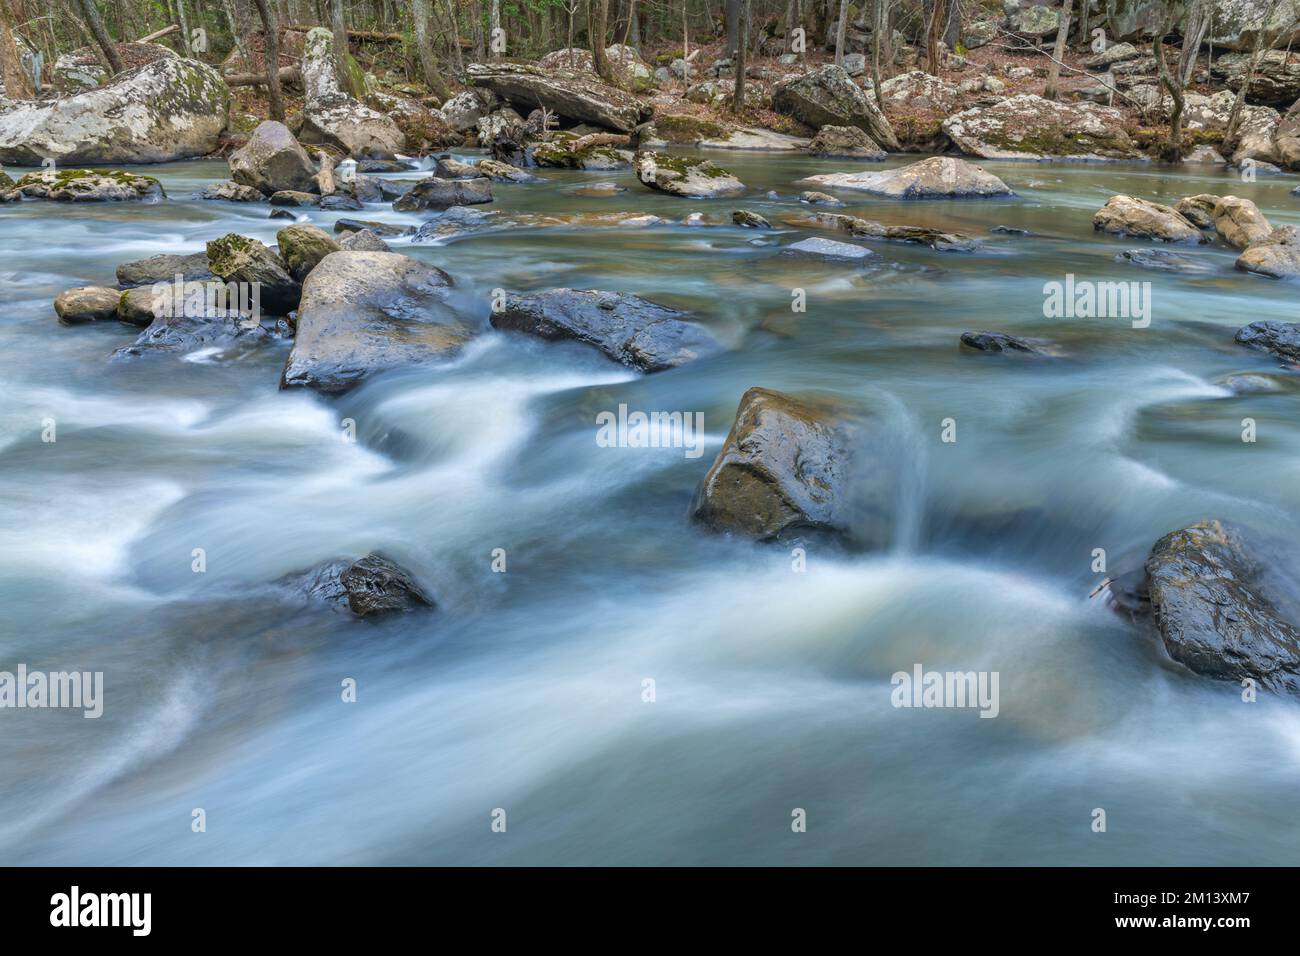 Water flowing through a rocky river in Cumberland Mountain Tennessee shows the peaceful, surreal tone of being in the wilderness. Stock Photo